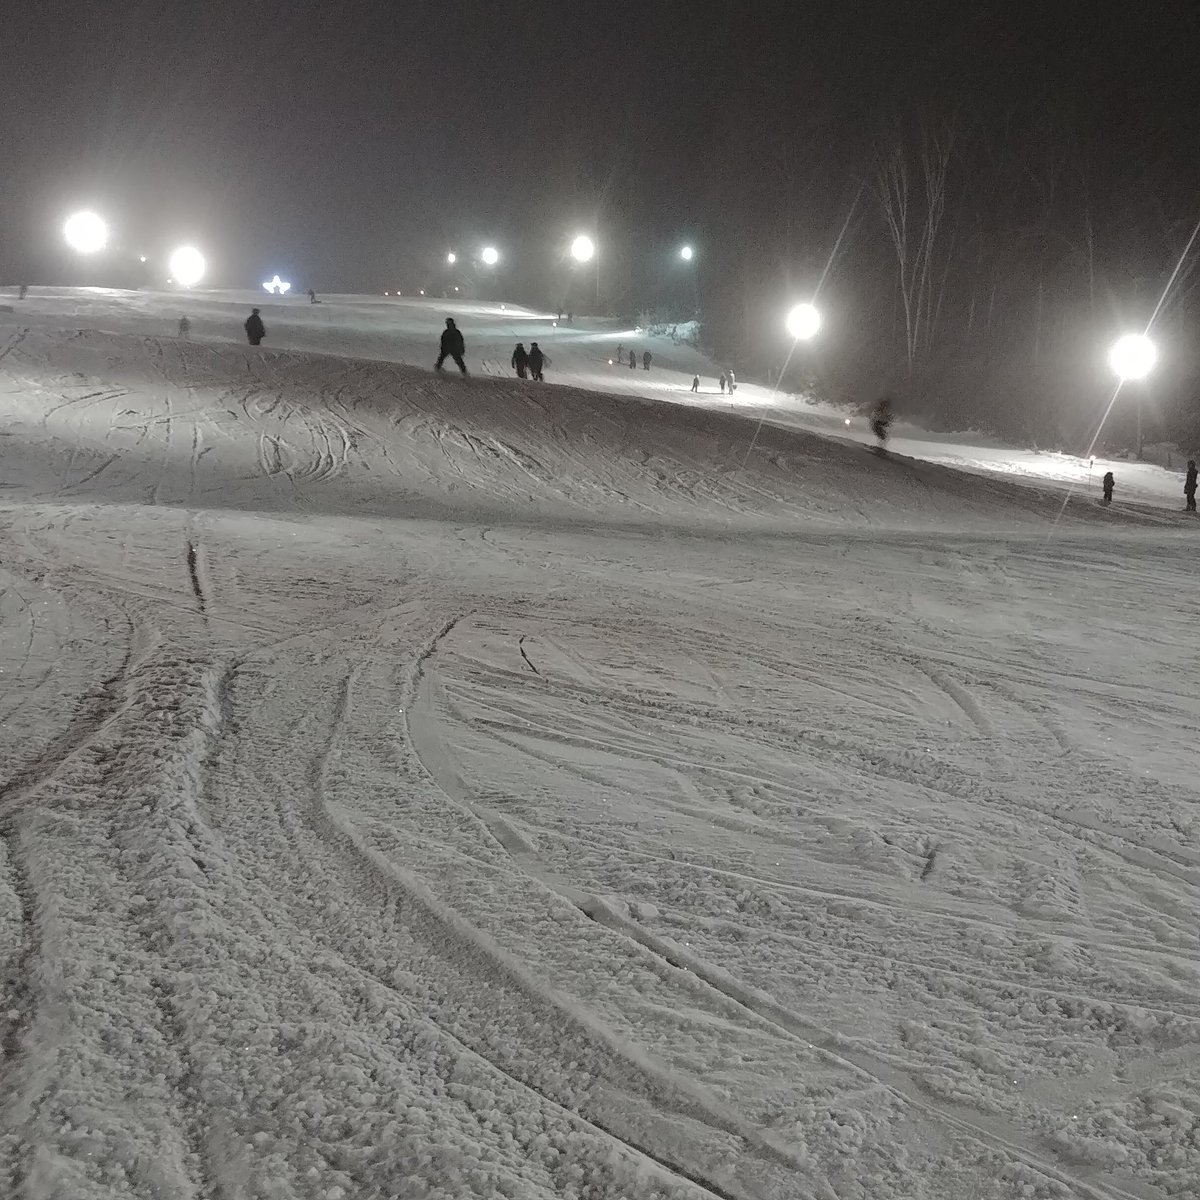 Ski after work! Come to Storrs Hill Ski Area this week on Tues and/or Thurs evening from 5:30-7:30 pm and catch the last of our midweek, public ski nights for the season. We will be open though for a few more weekends (Fri nites, Sat & Sun) thru Mar 30! #nightskiing #skilocal